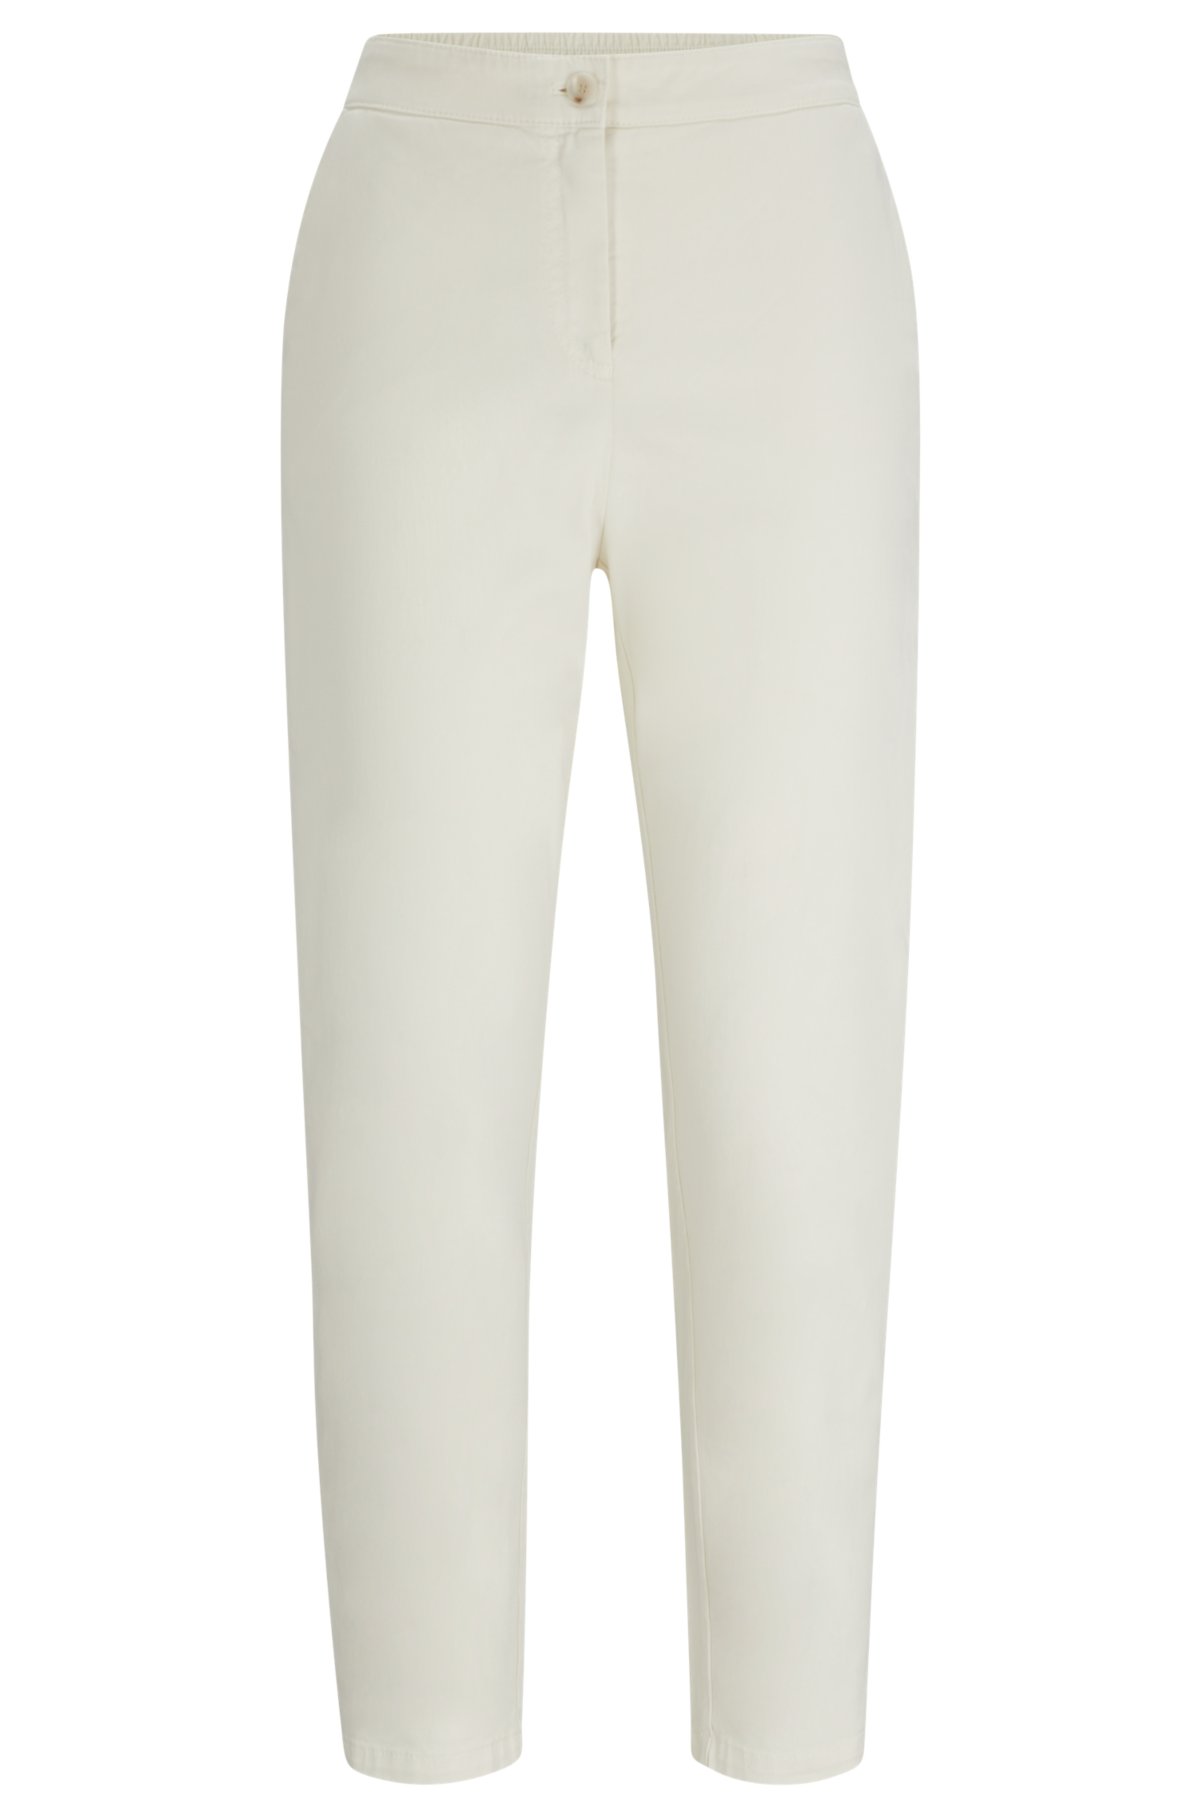 Cotton-blend trousers with elasticated waistband, White